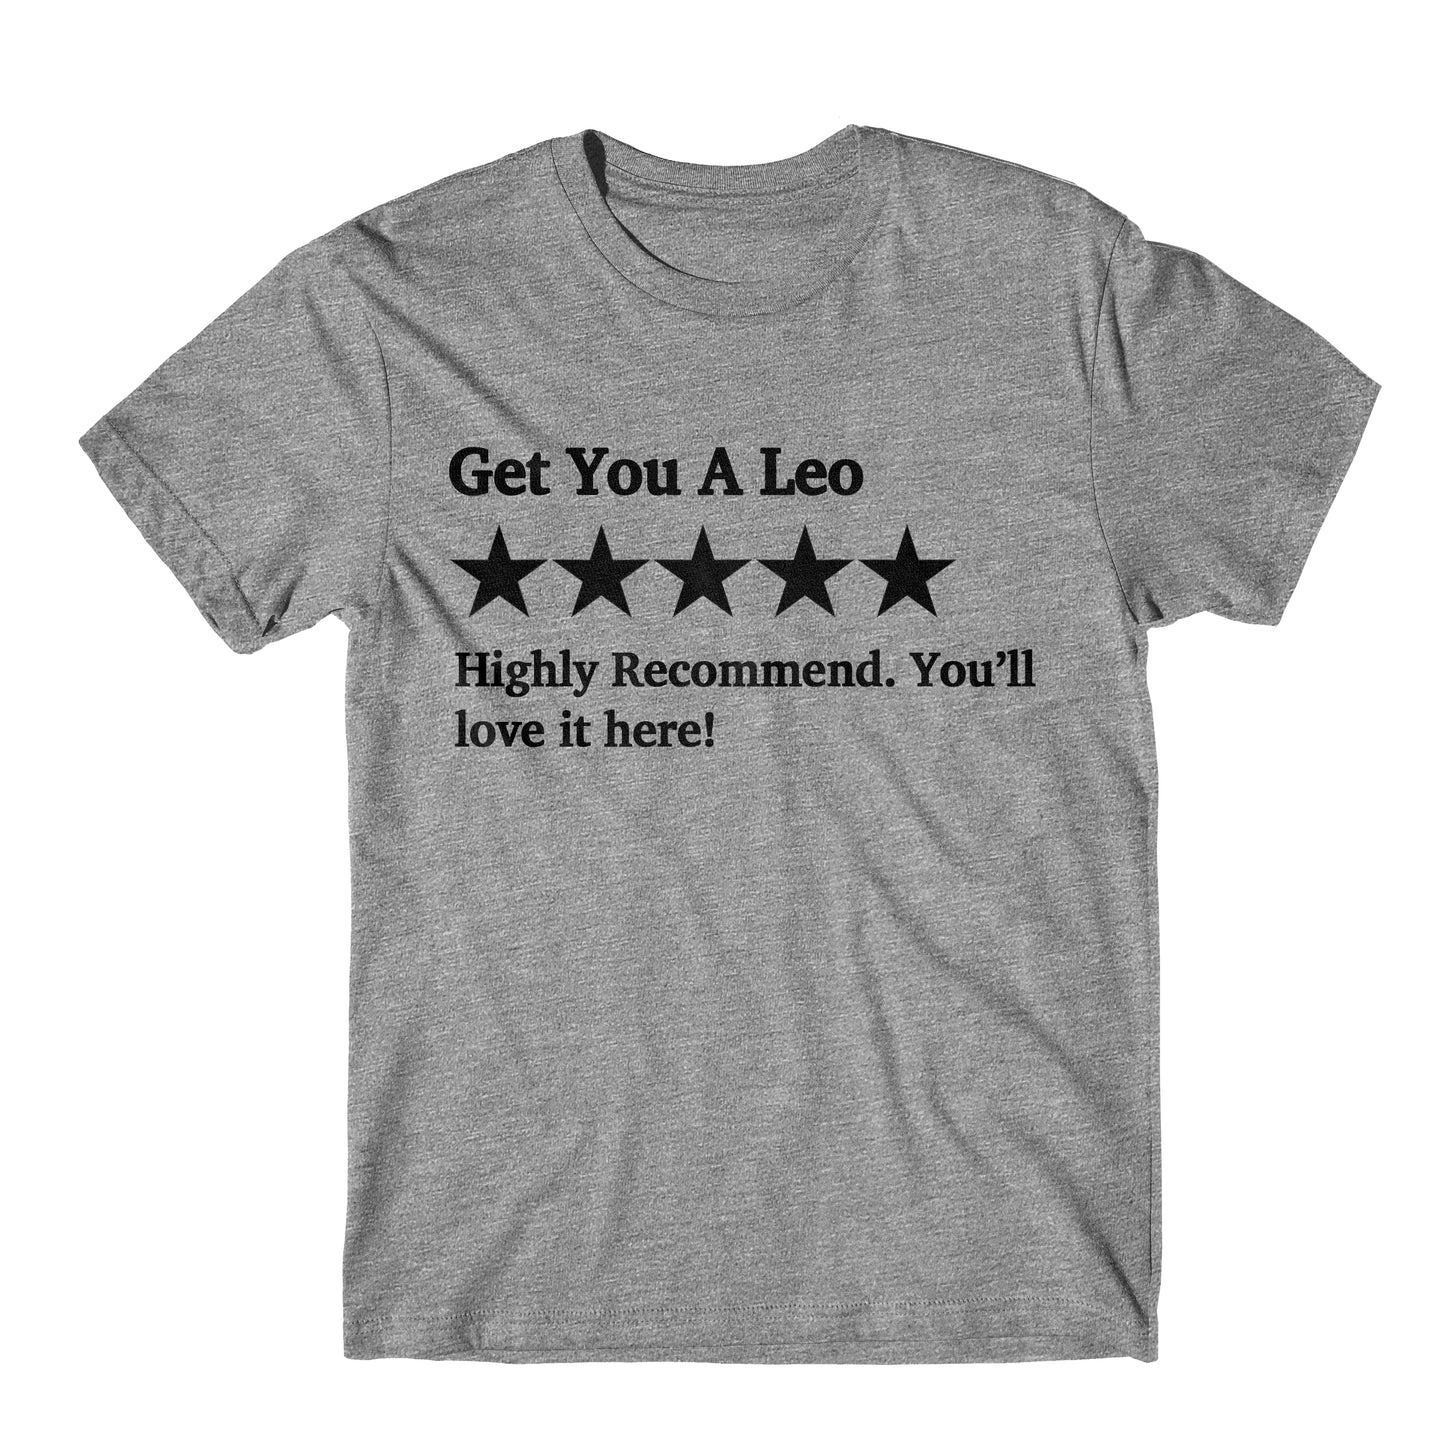 "Get You A Leo Five Star Rating" Tee